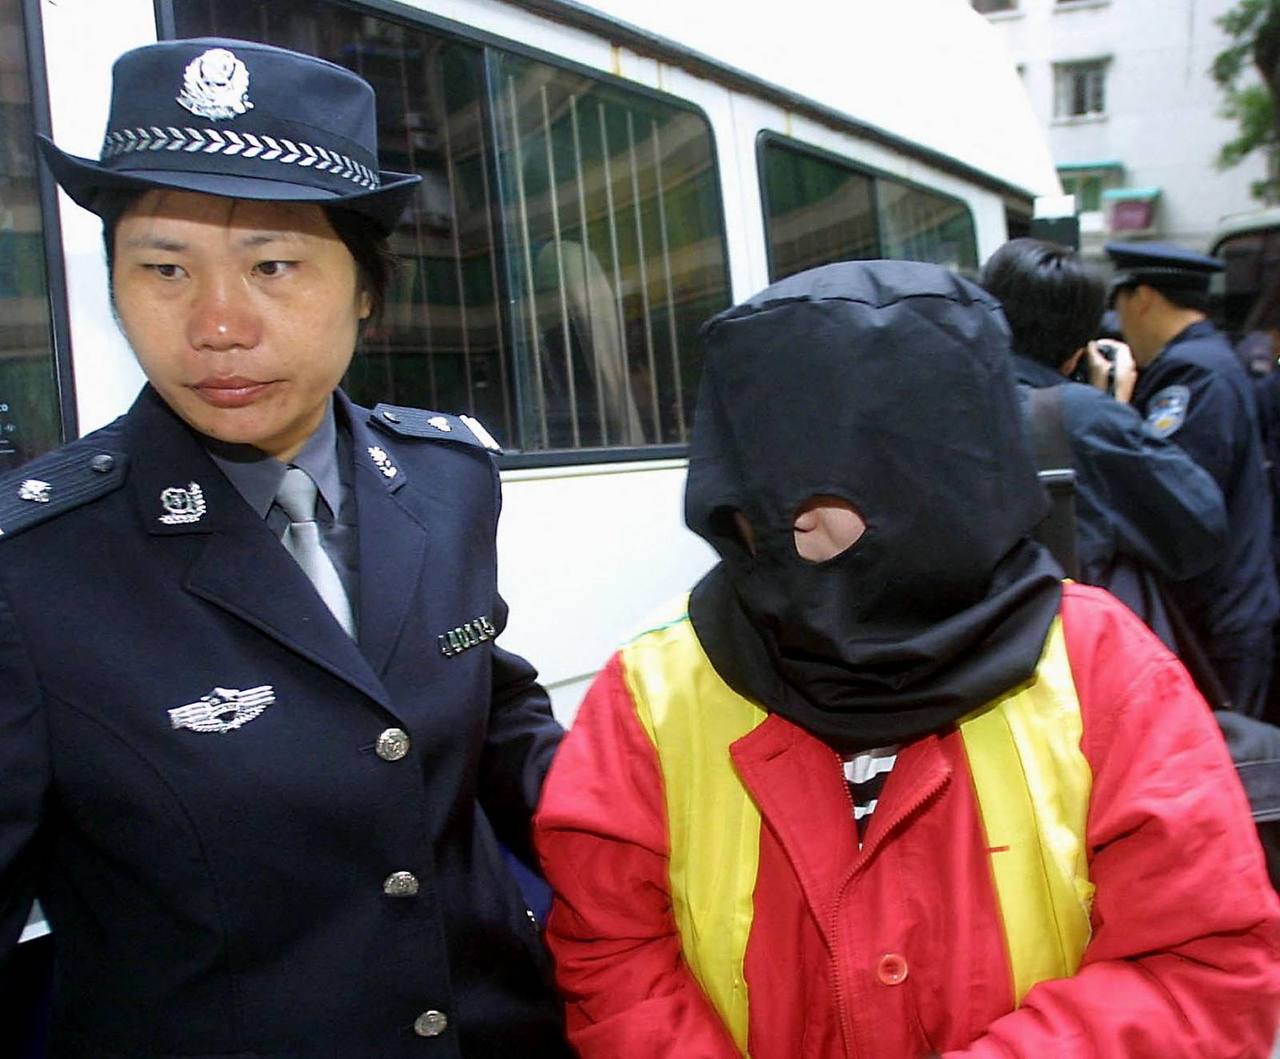 2010: Southern Metropolis Daily investigates China’s notorious “black prisons”